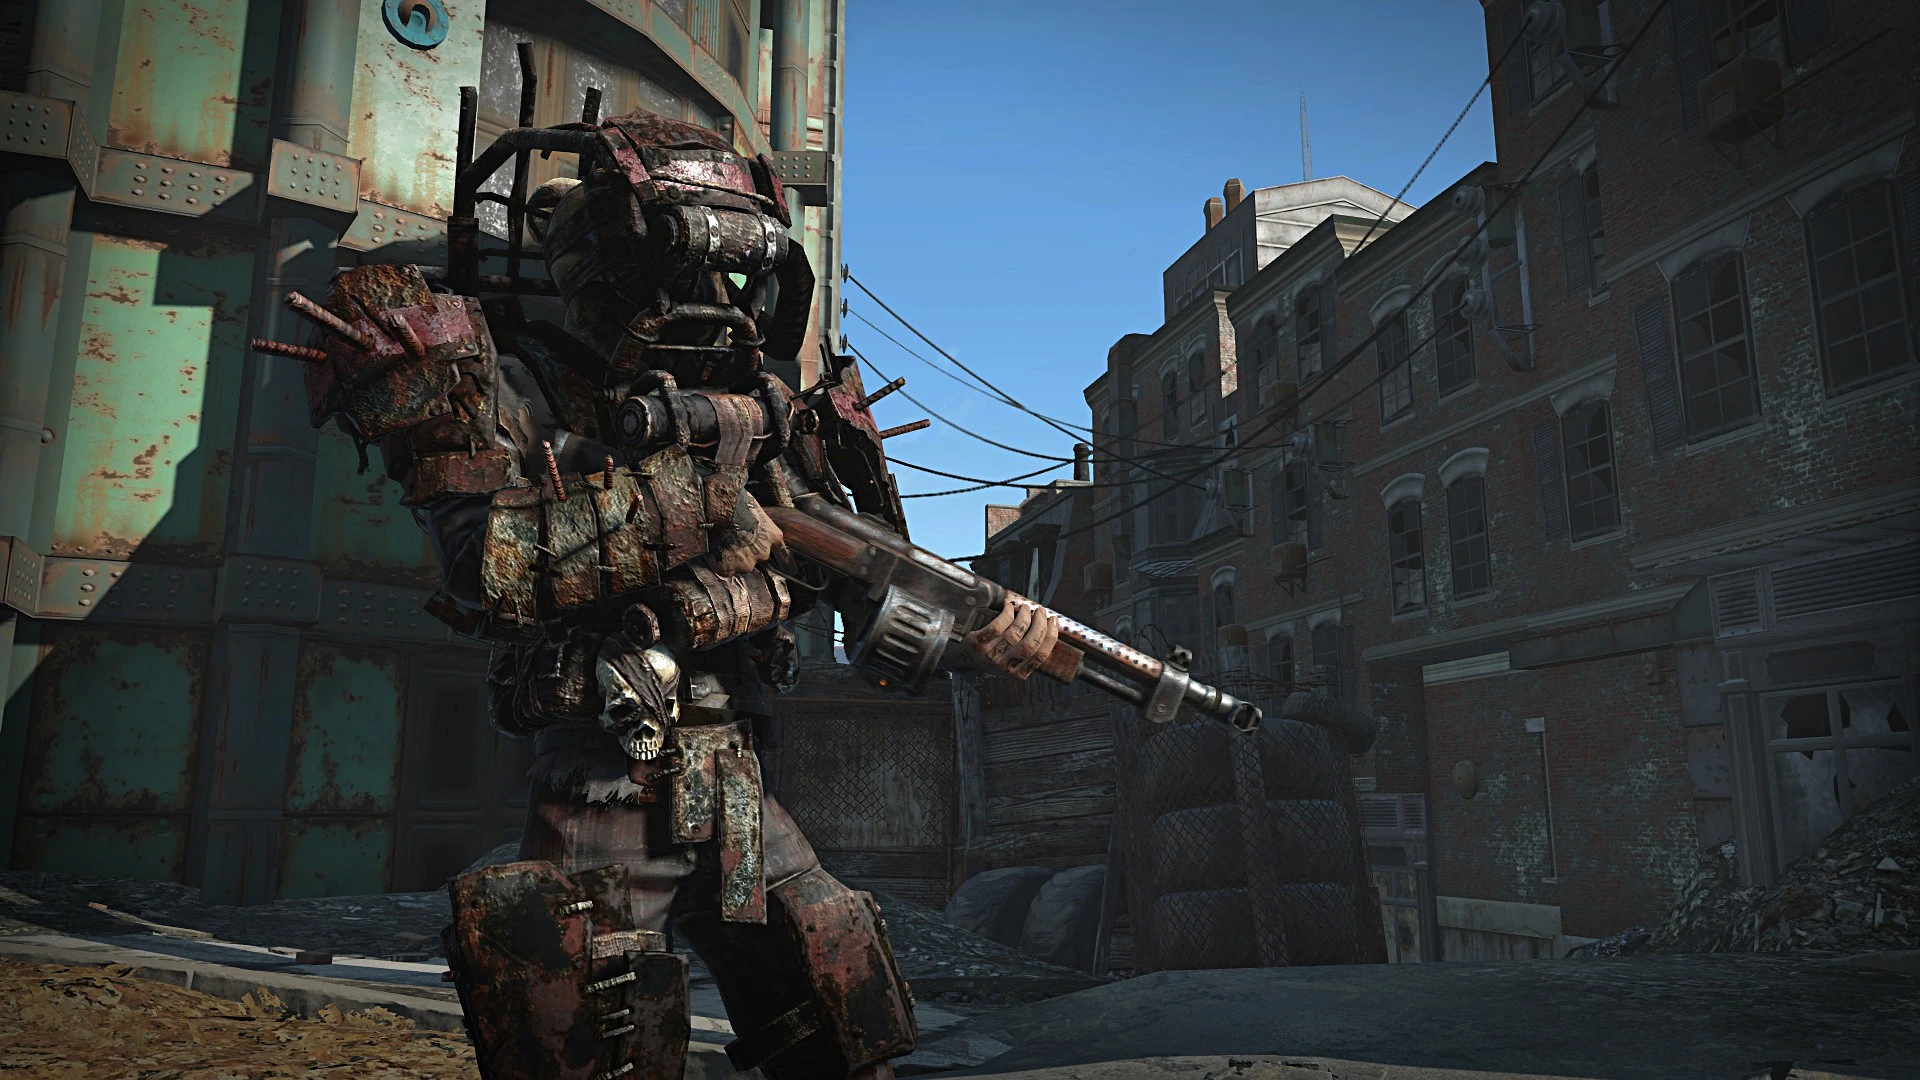 Hd Raider Armor At Fallout 4 Nexus Mods And Community Of Fallout 4 ...